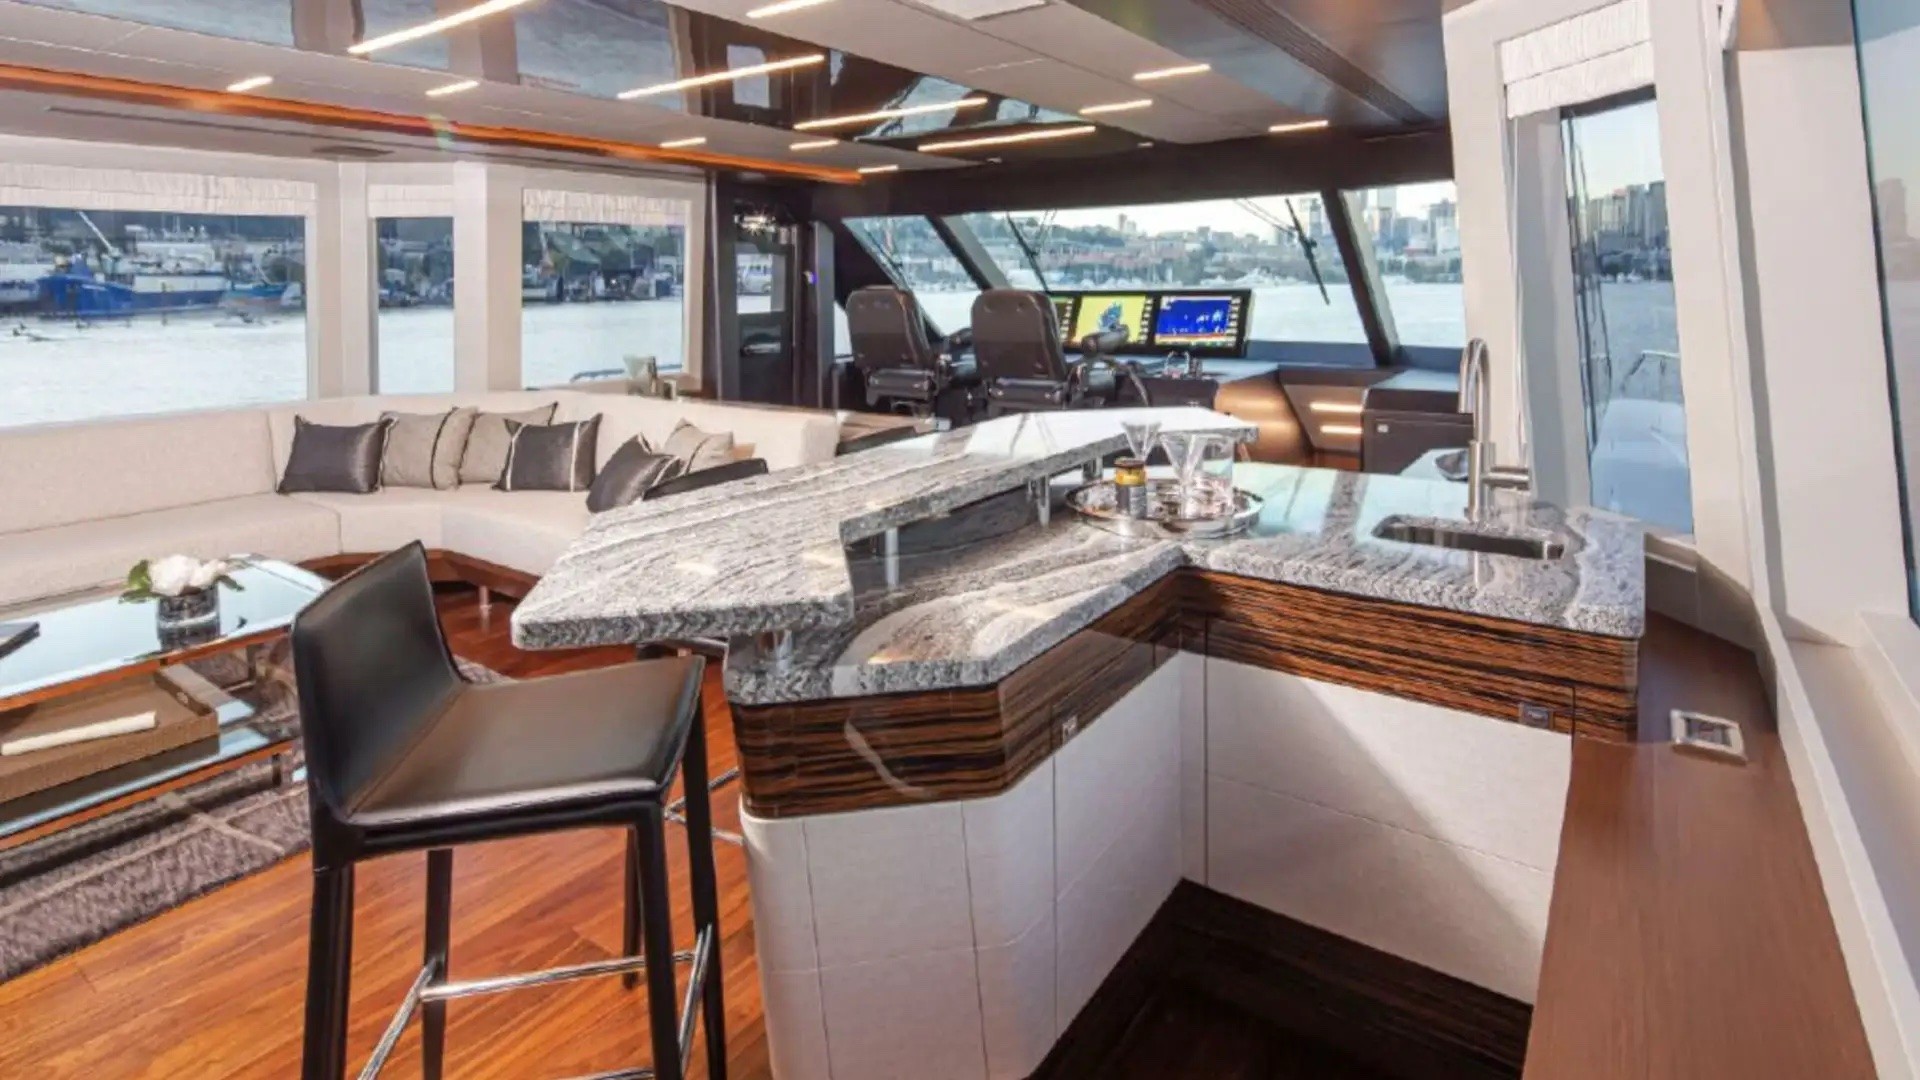 the golden standard for comfort and peace can be found in the 8 million tlc yacht 6